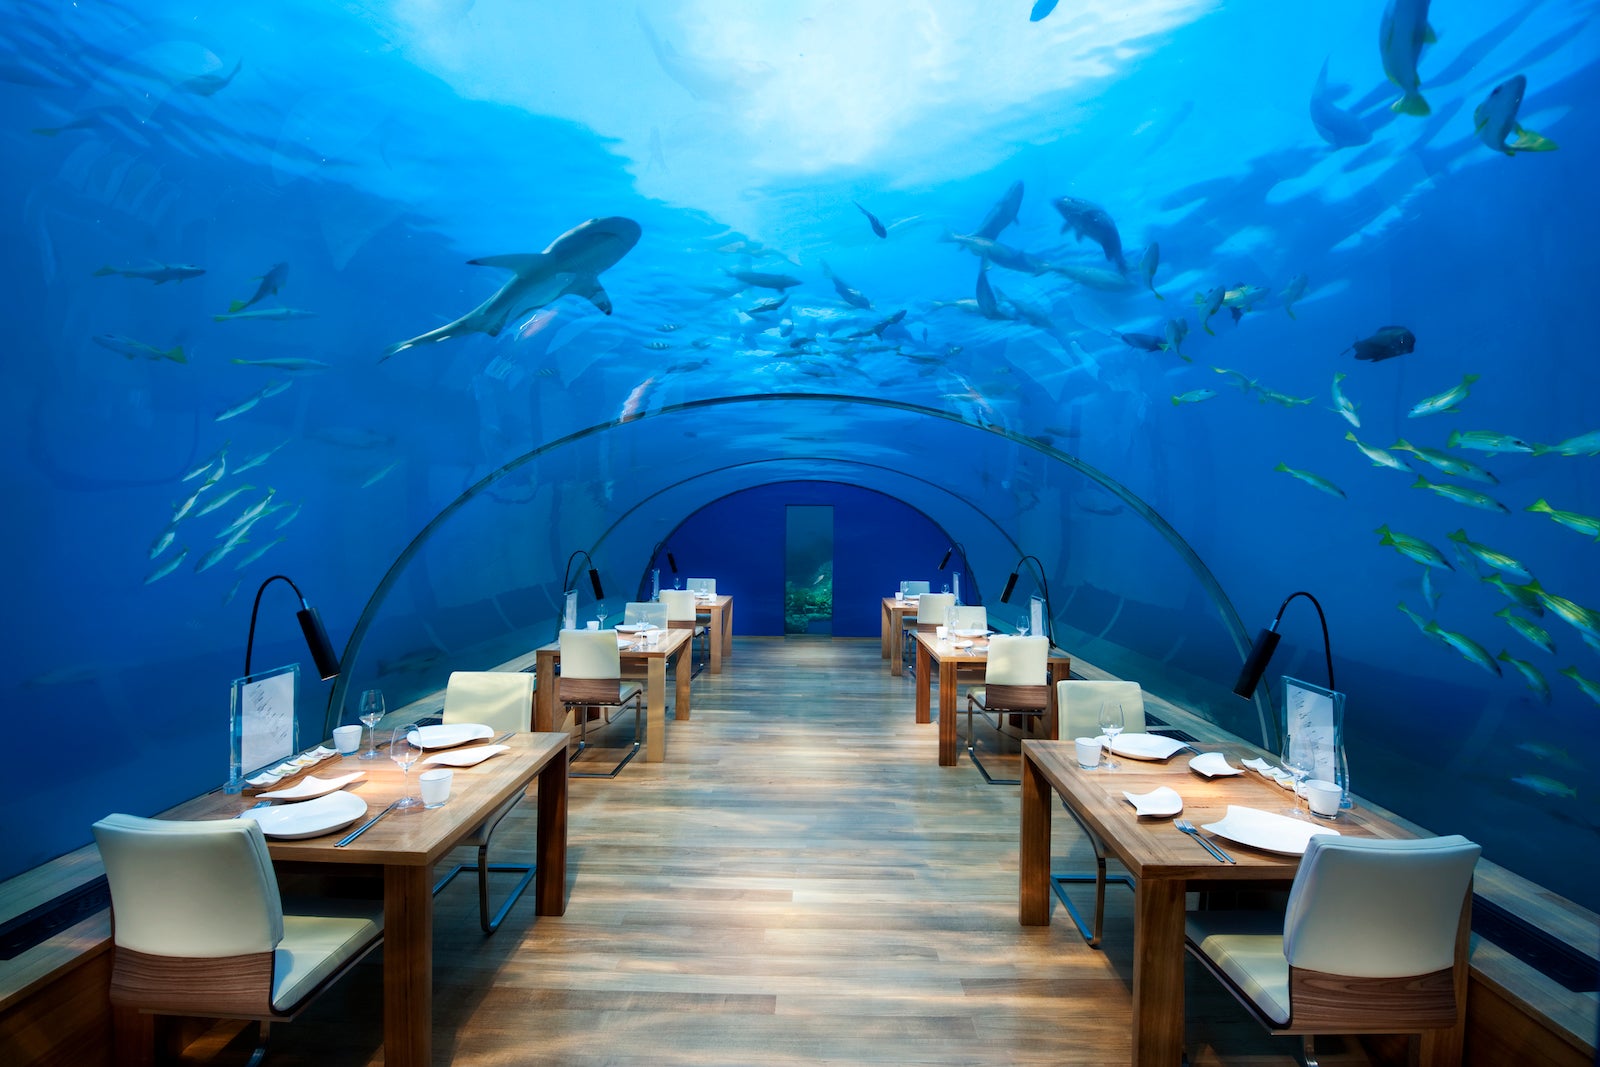 Resorts With Underwater Hotel Rooms And Restaurants - The Points Guy